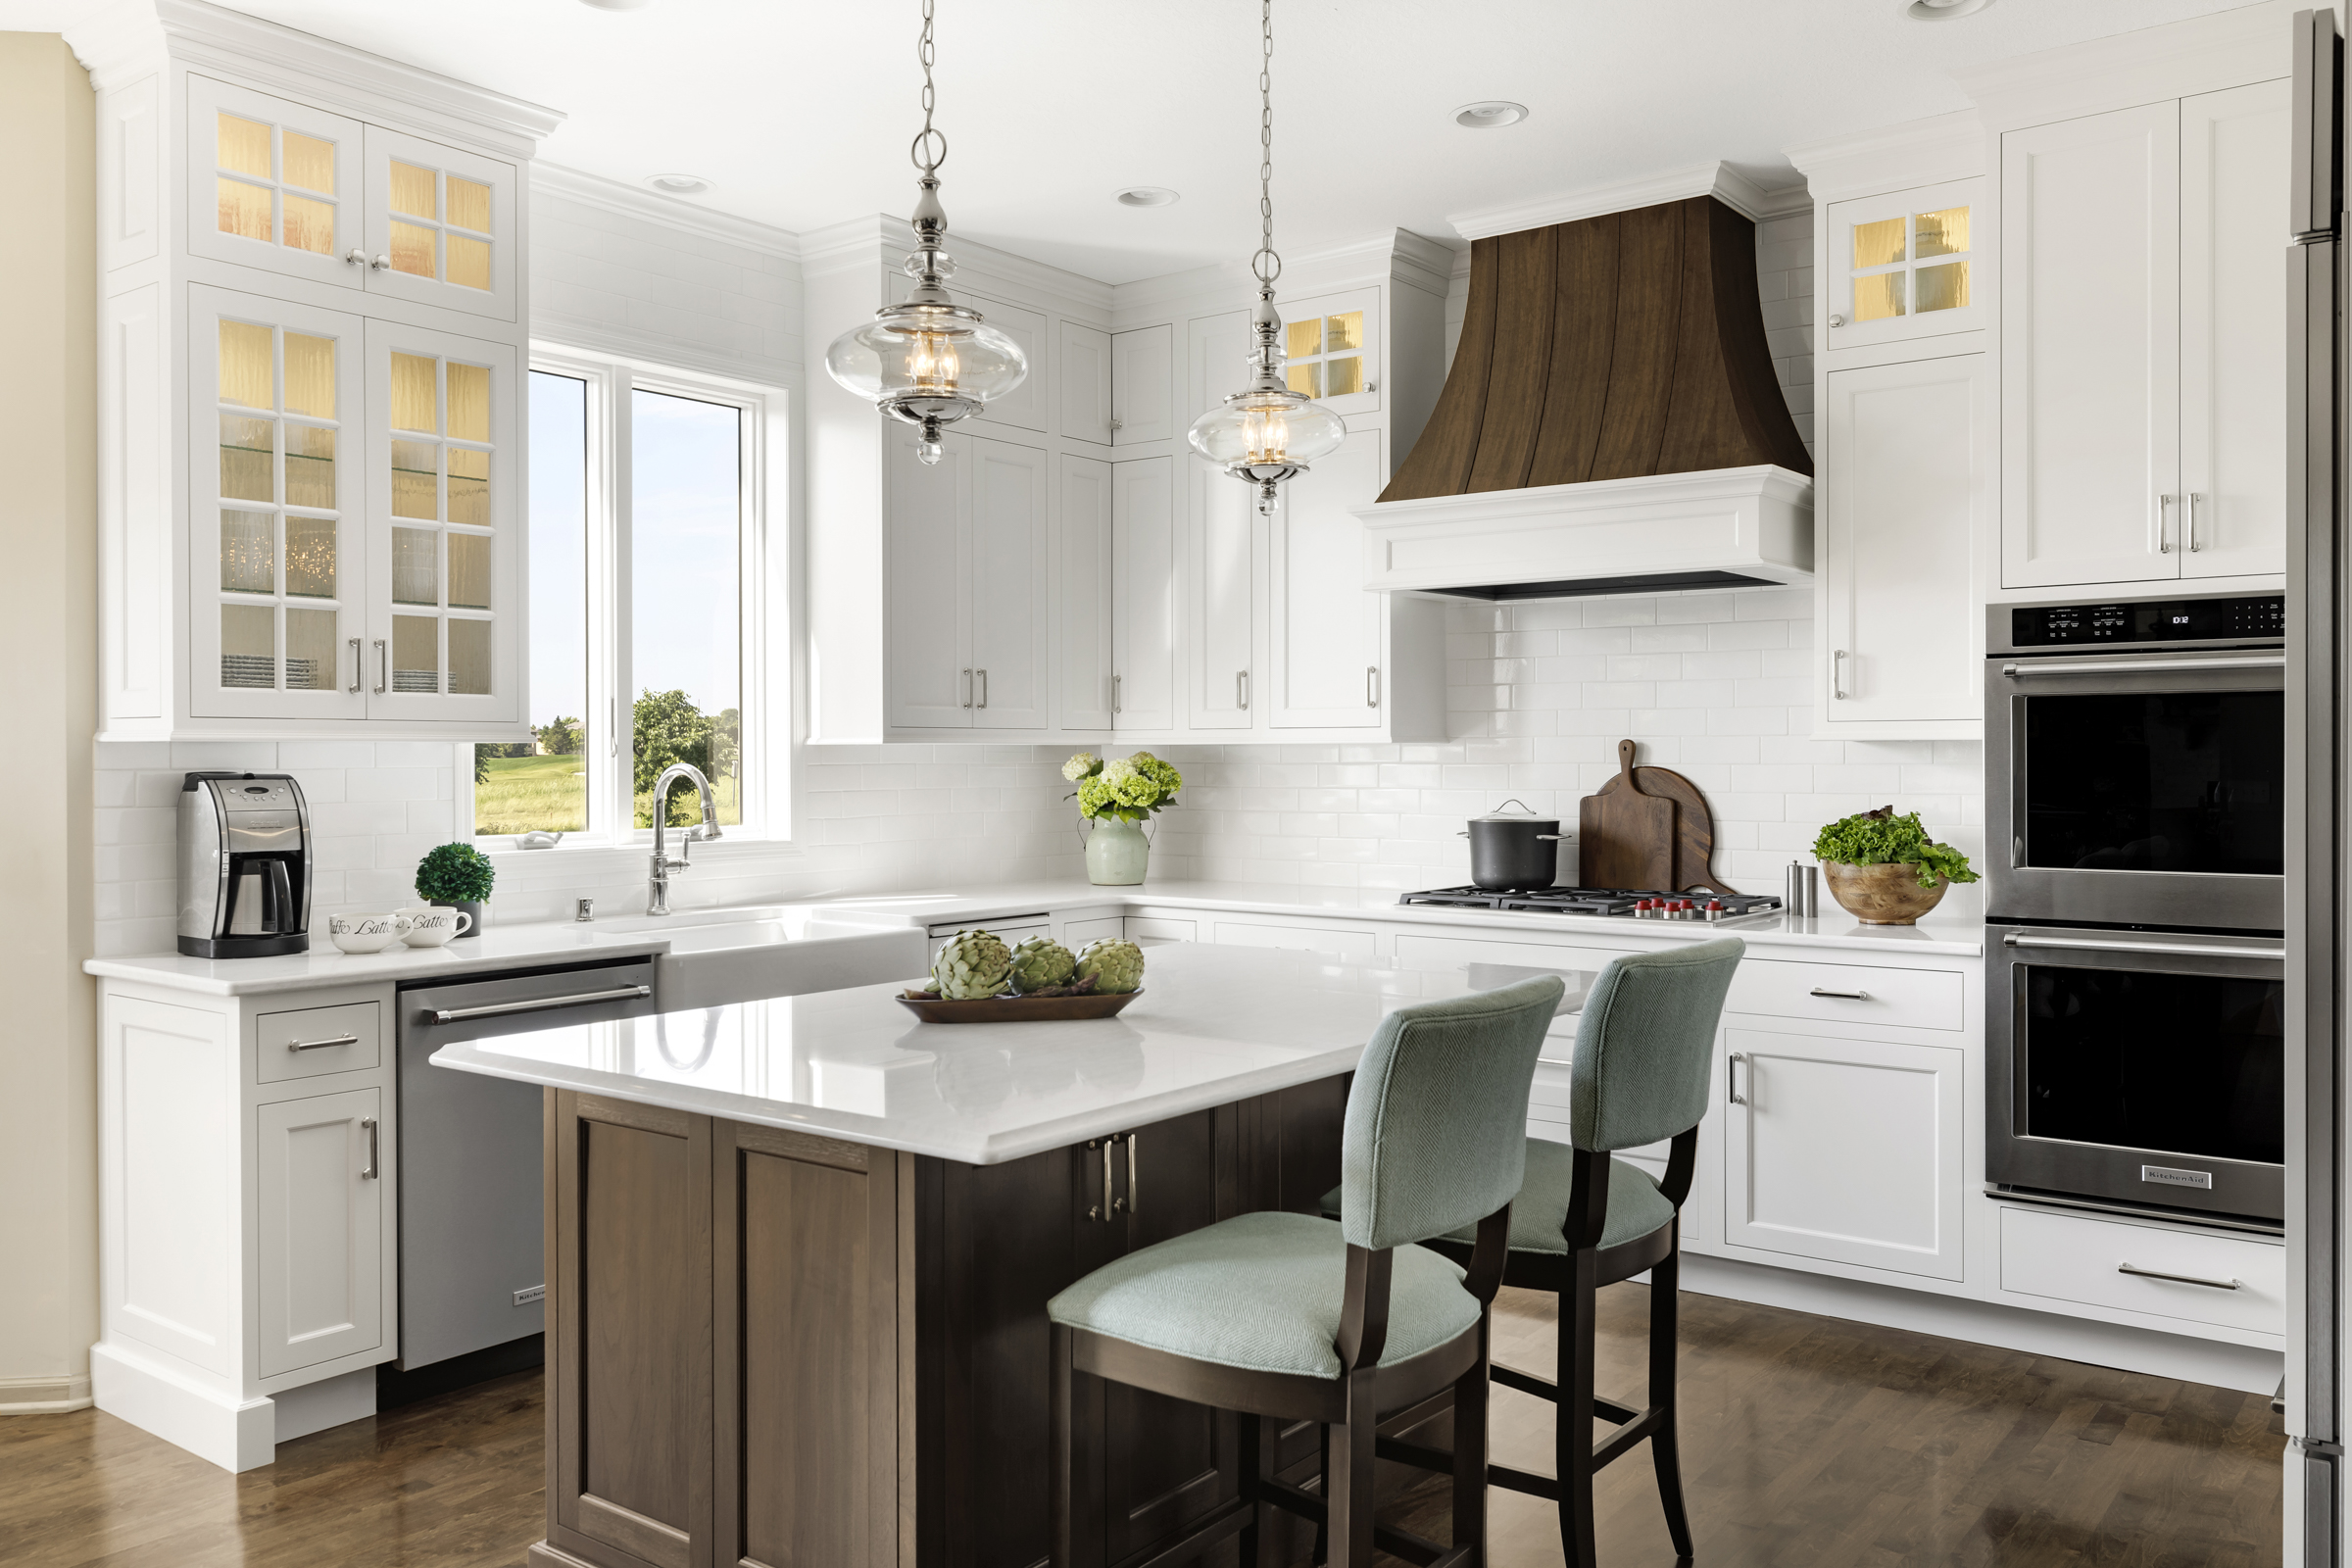 Transitional kitchen remodel with white cabinets and wooden island and custom hood vent